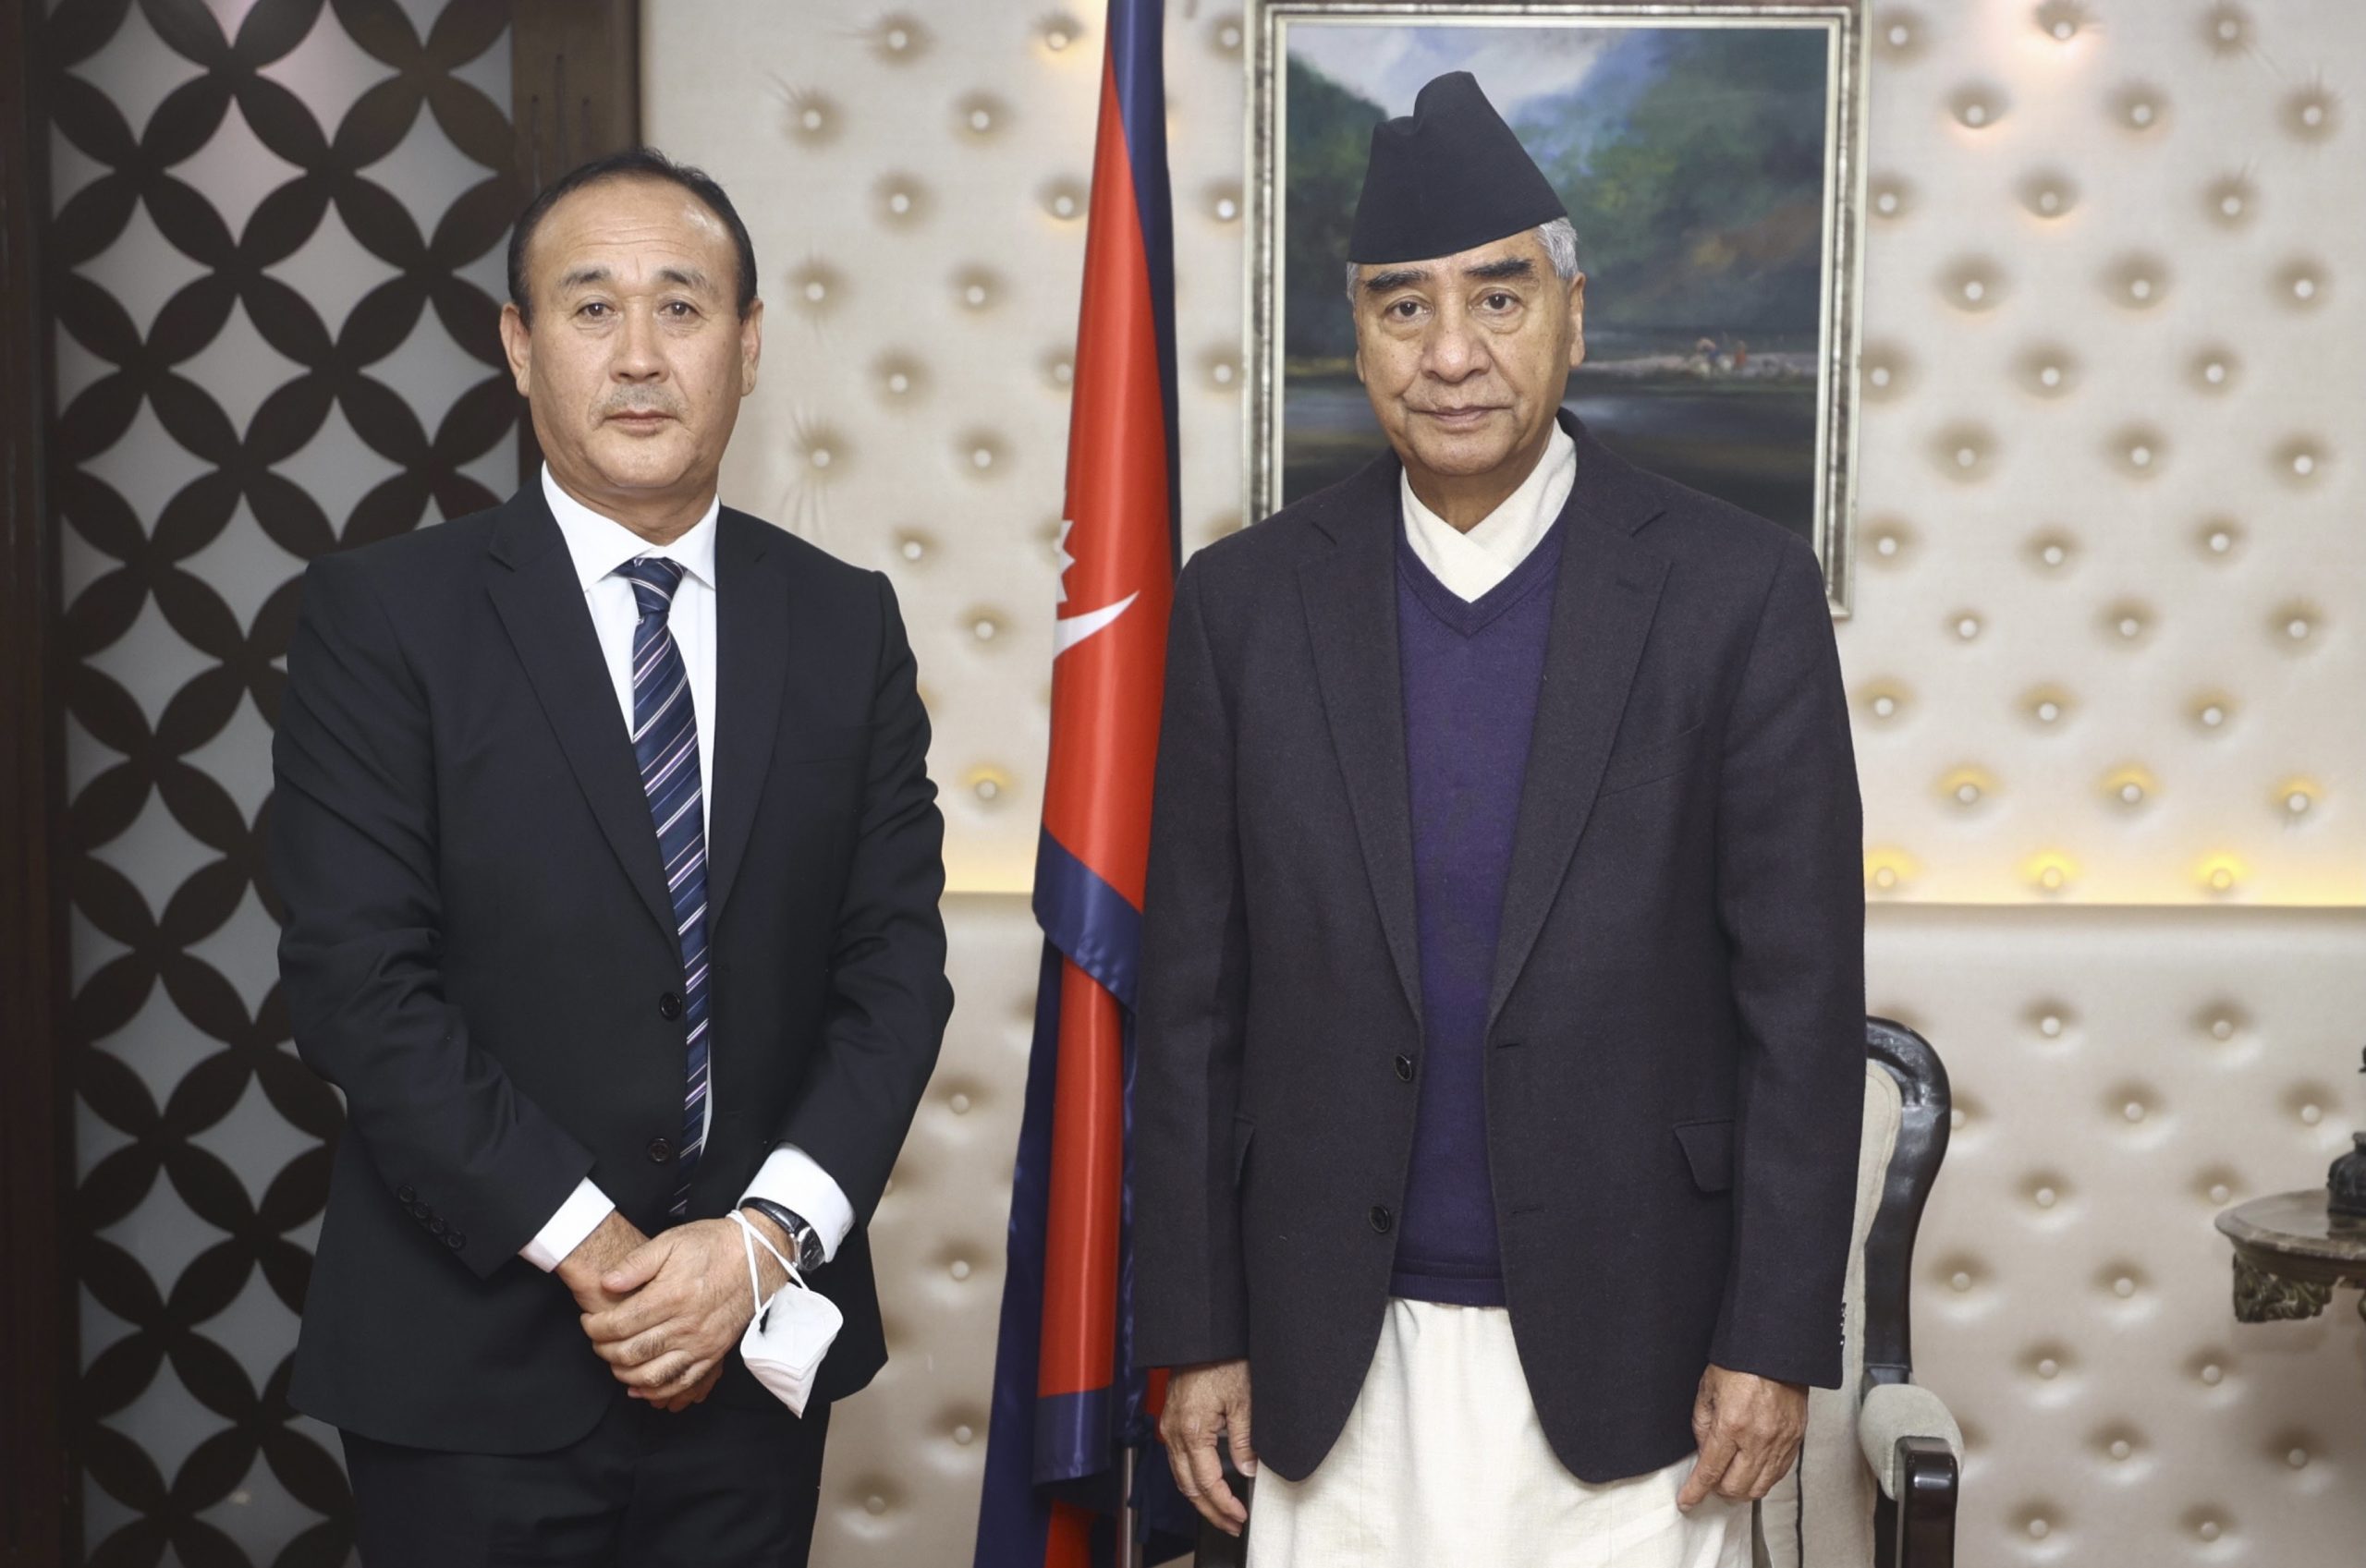 The visiting secretary-general of the Bay of Bengal Initiative for Multi-Sectoral Technical and Economic Cooperation (BIMSTEC), Tenzin Lekphell, meets Prime Minister Sher Bahadur Deuba, in Kathmandu, on Wednesday, January 5, 2021. Photo: RSS